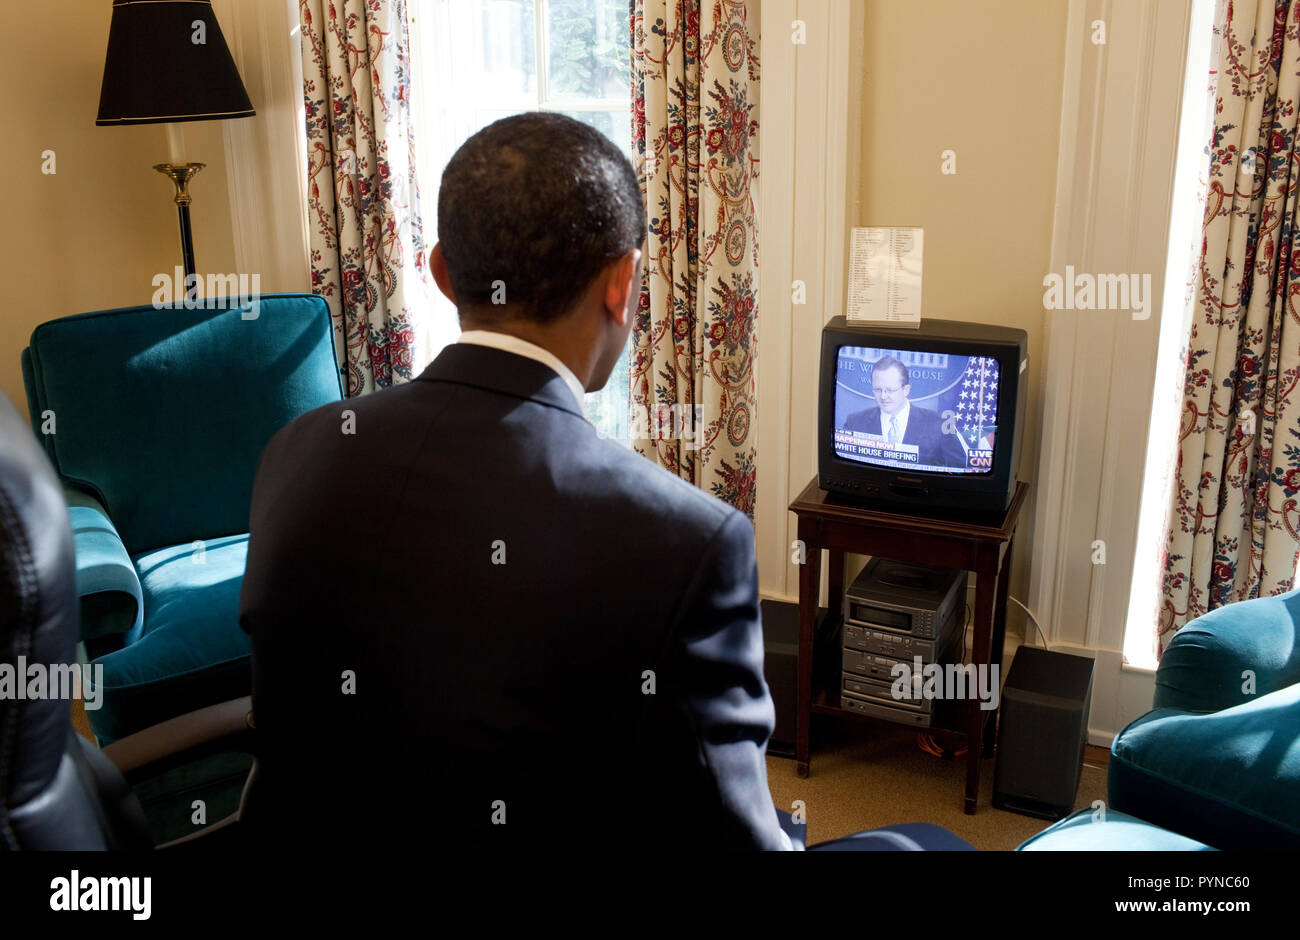 President Obama watches Press Secretary Robert Gibbs' first Press Briefing  on television, in his private study off the Oval Office 1/22/09 Stock Photo  - Alamy